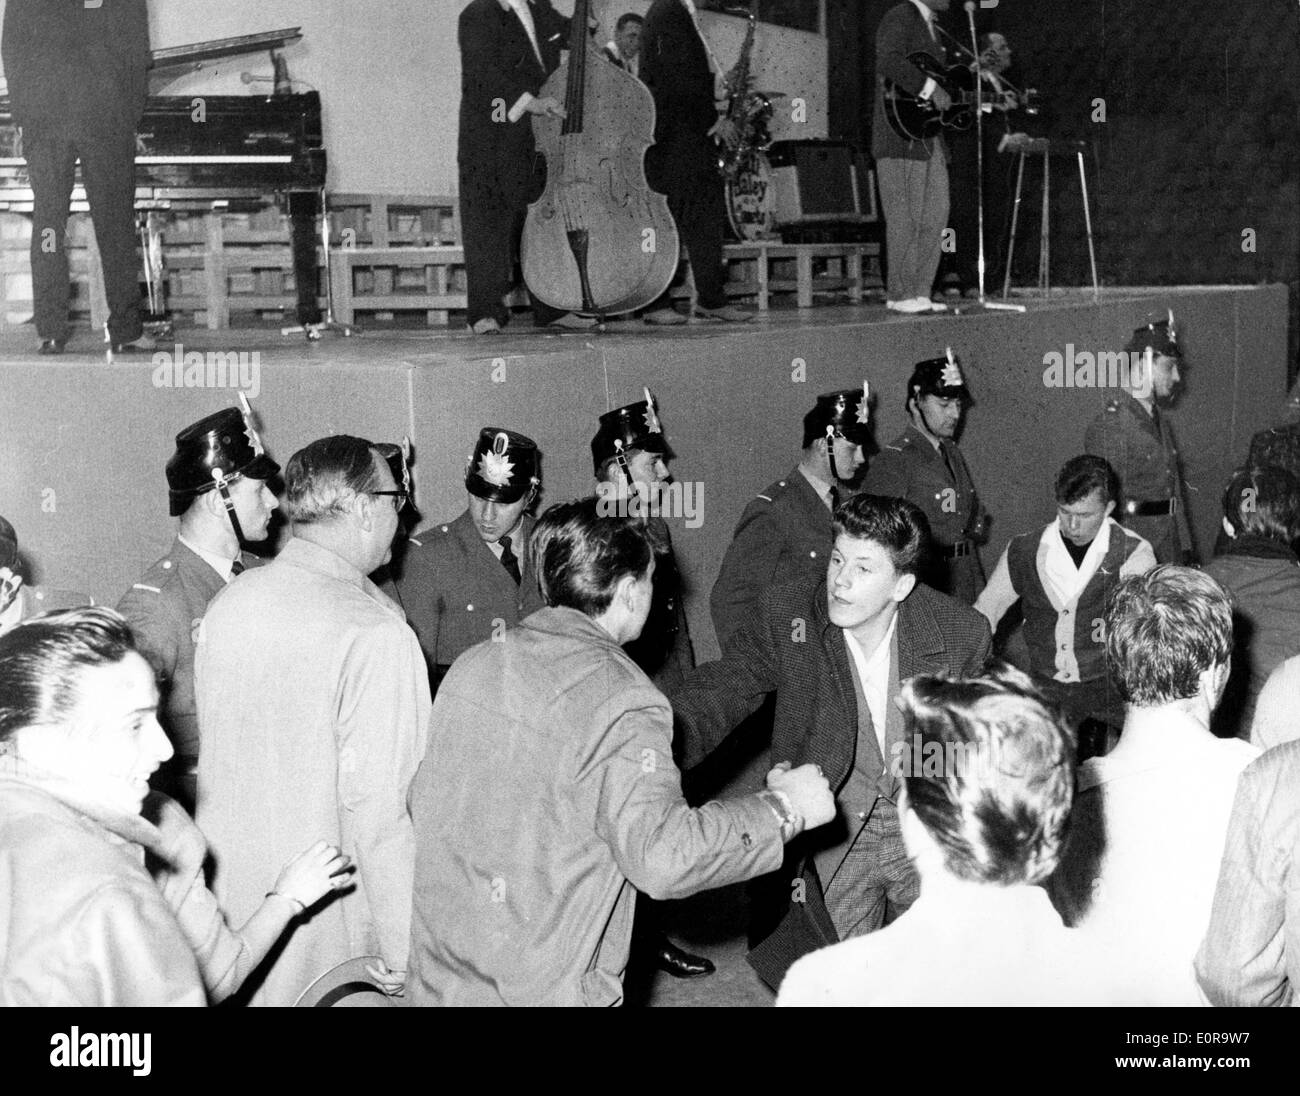 Rowdy fans during a Bill Haley and the Comets concert Stock Photo